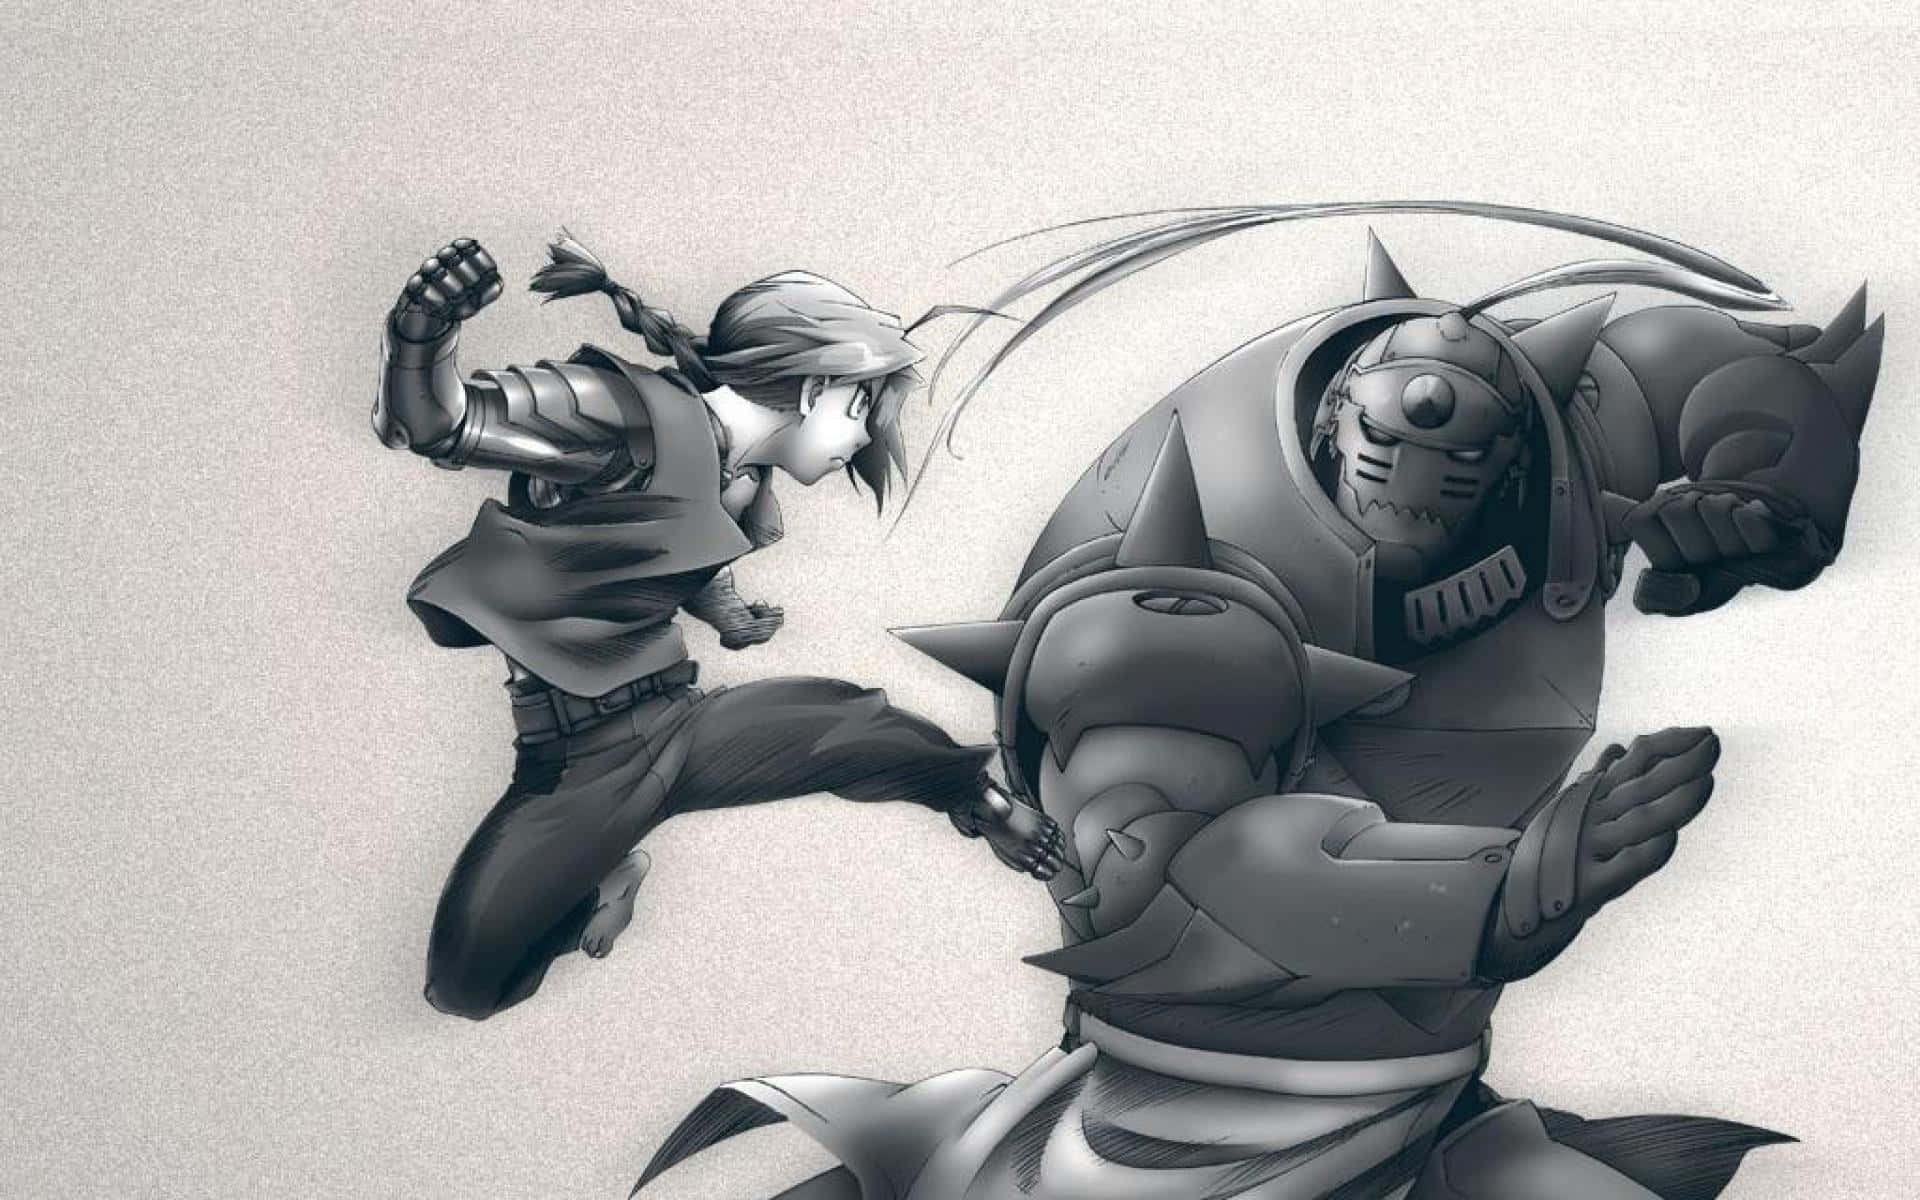 Edward and Alphonse Elric use alchemy to defy the laws of nature